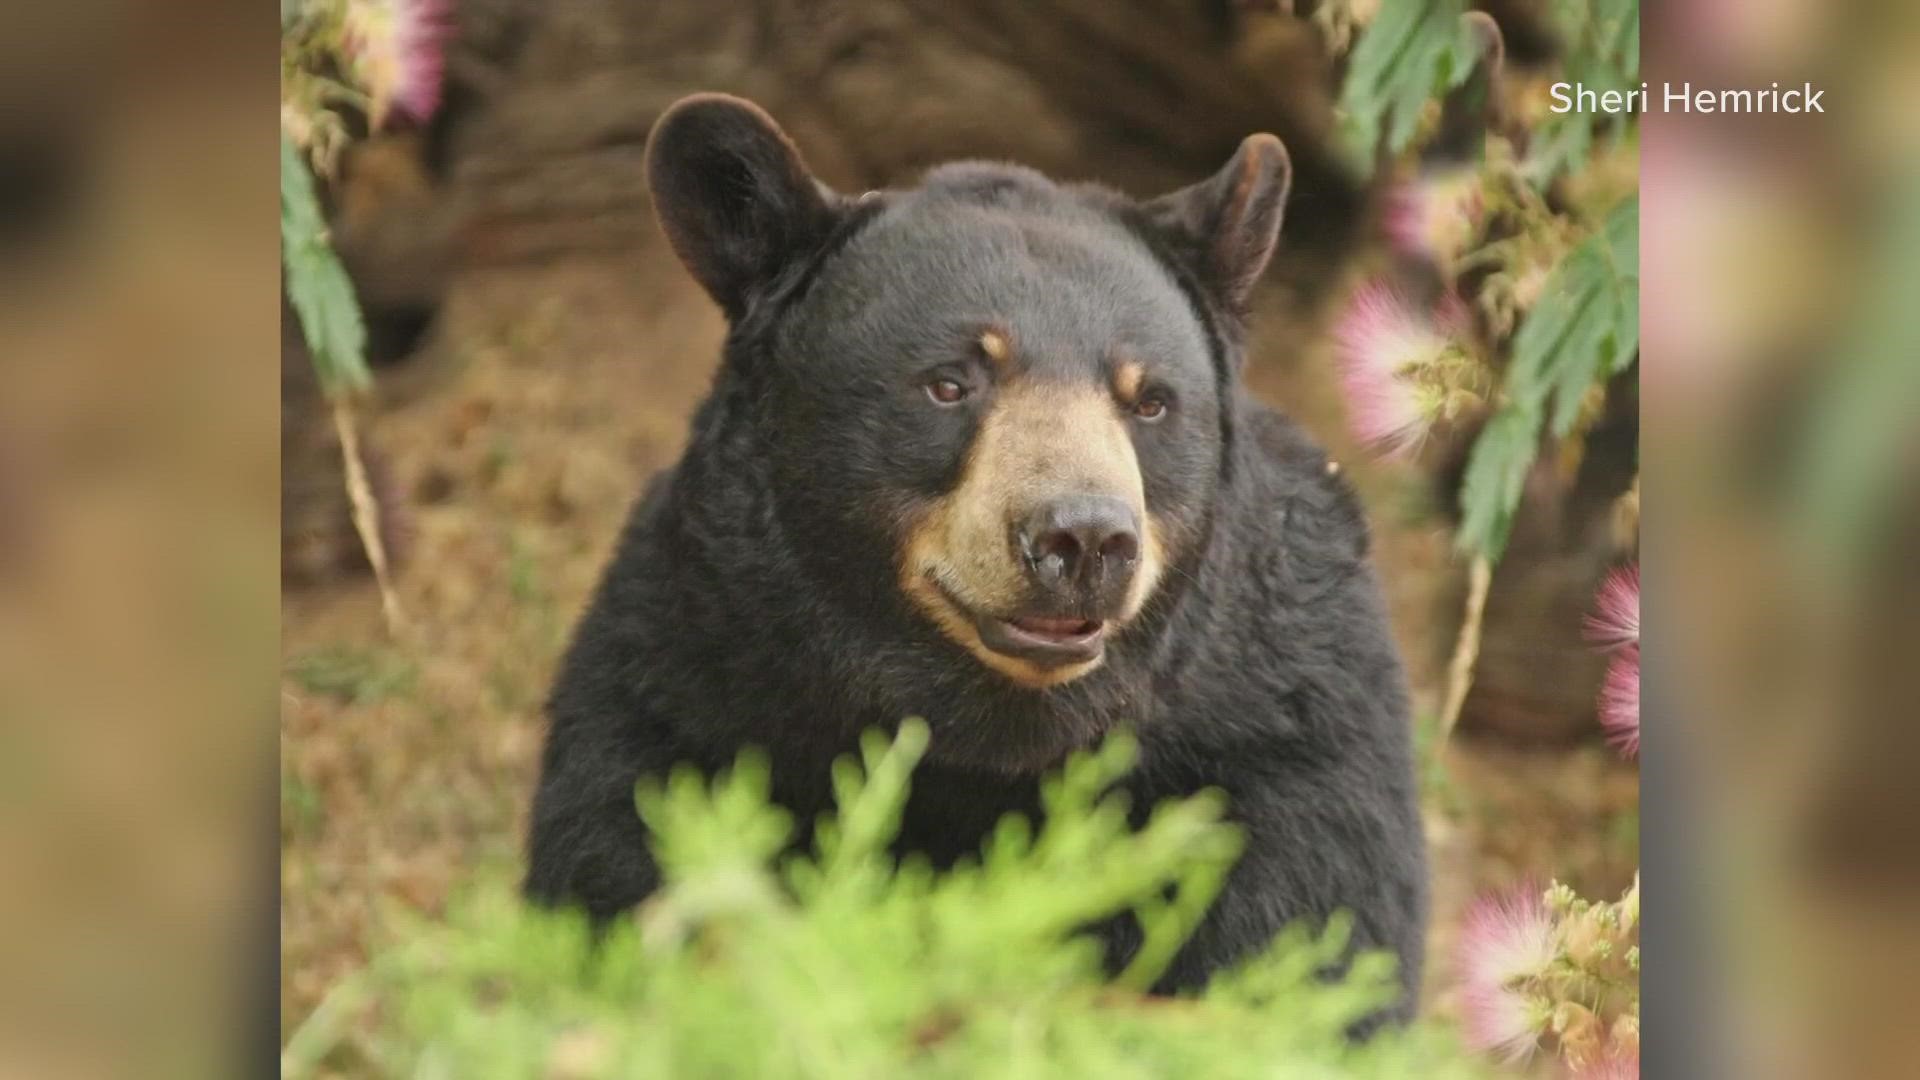 Donna, a North American black bear, was with the zoo since 2005.